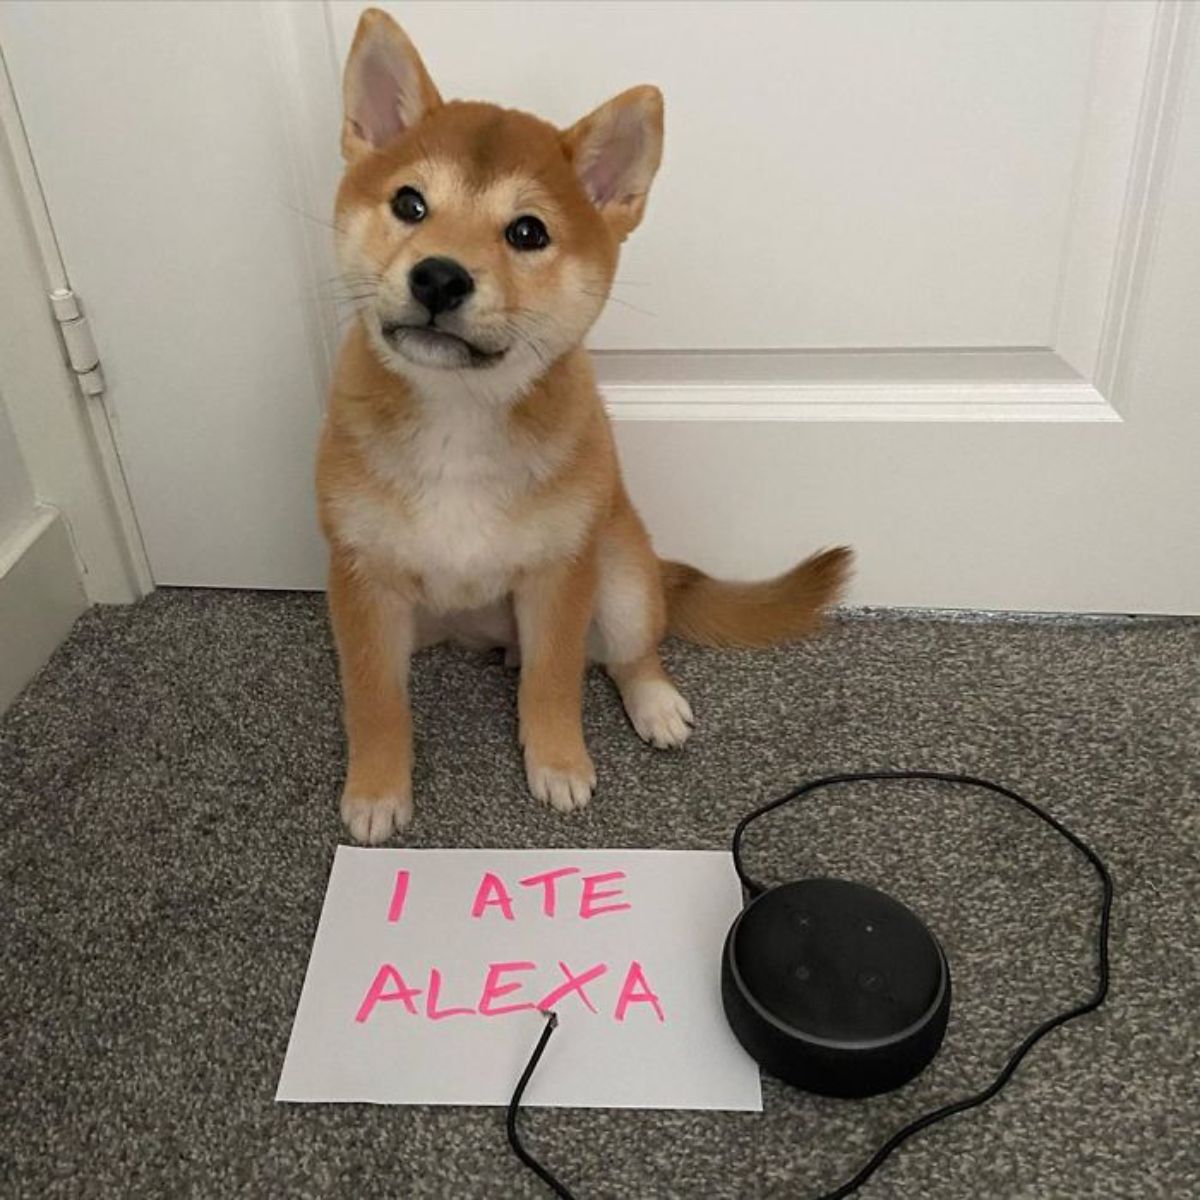 brown and white shiba inu sitting on grey carpet with a note saying "I ate Alexa"